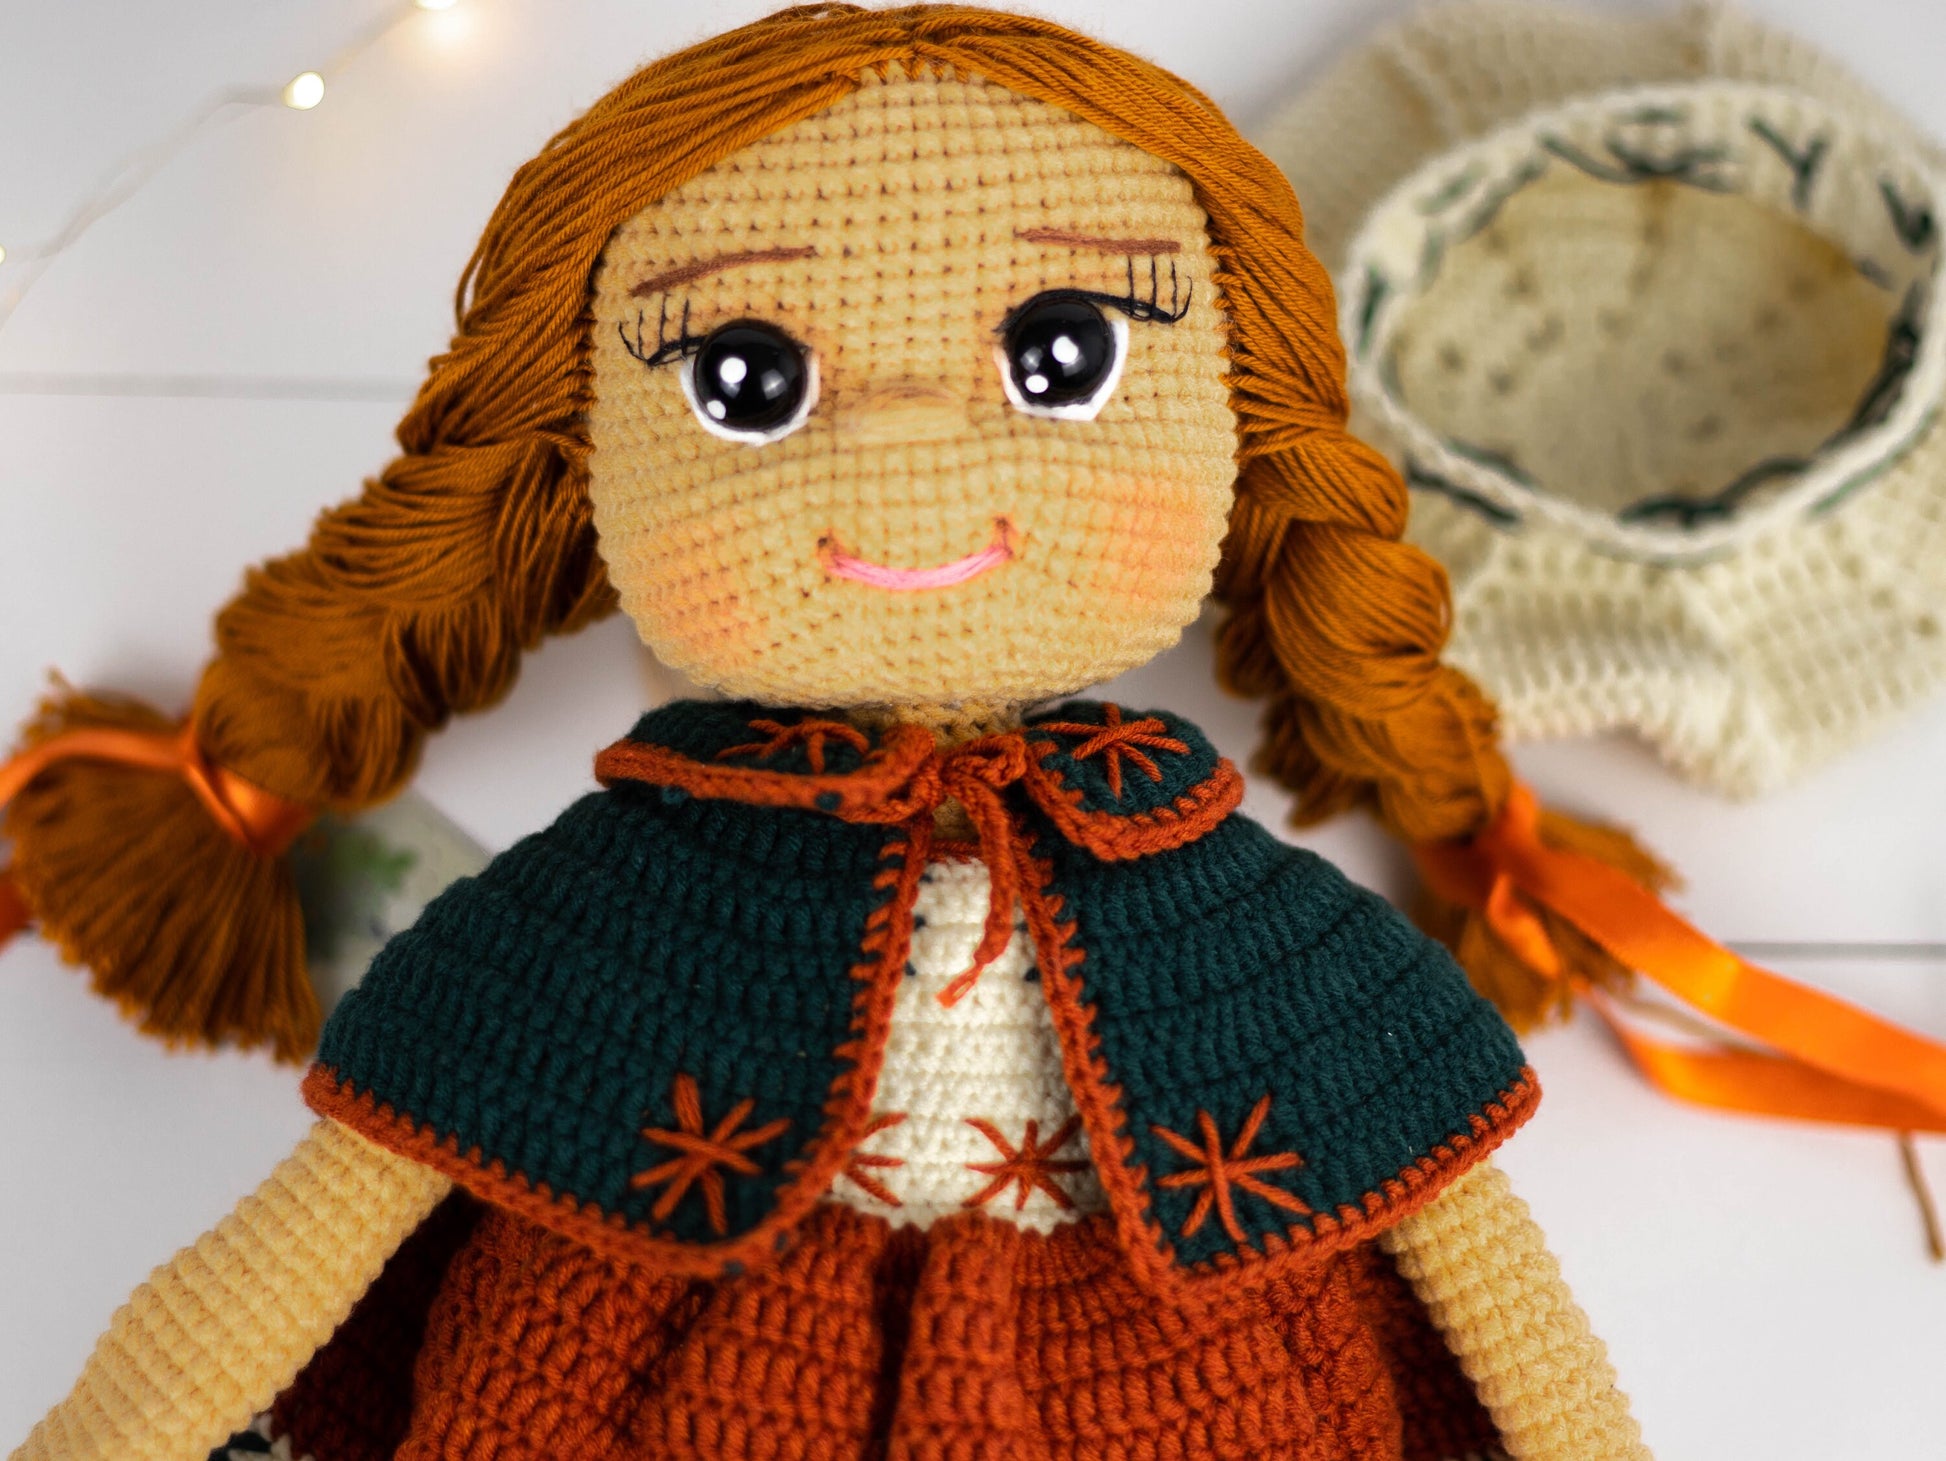 Crochet Doll for Sale Vintage Doll, Knit Doll, Amigurumi Doll Finished, Handmade Doll For Girl, Hand Knit Doll, with Clothes, Birthday Gift